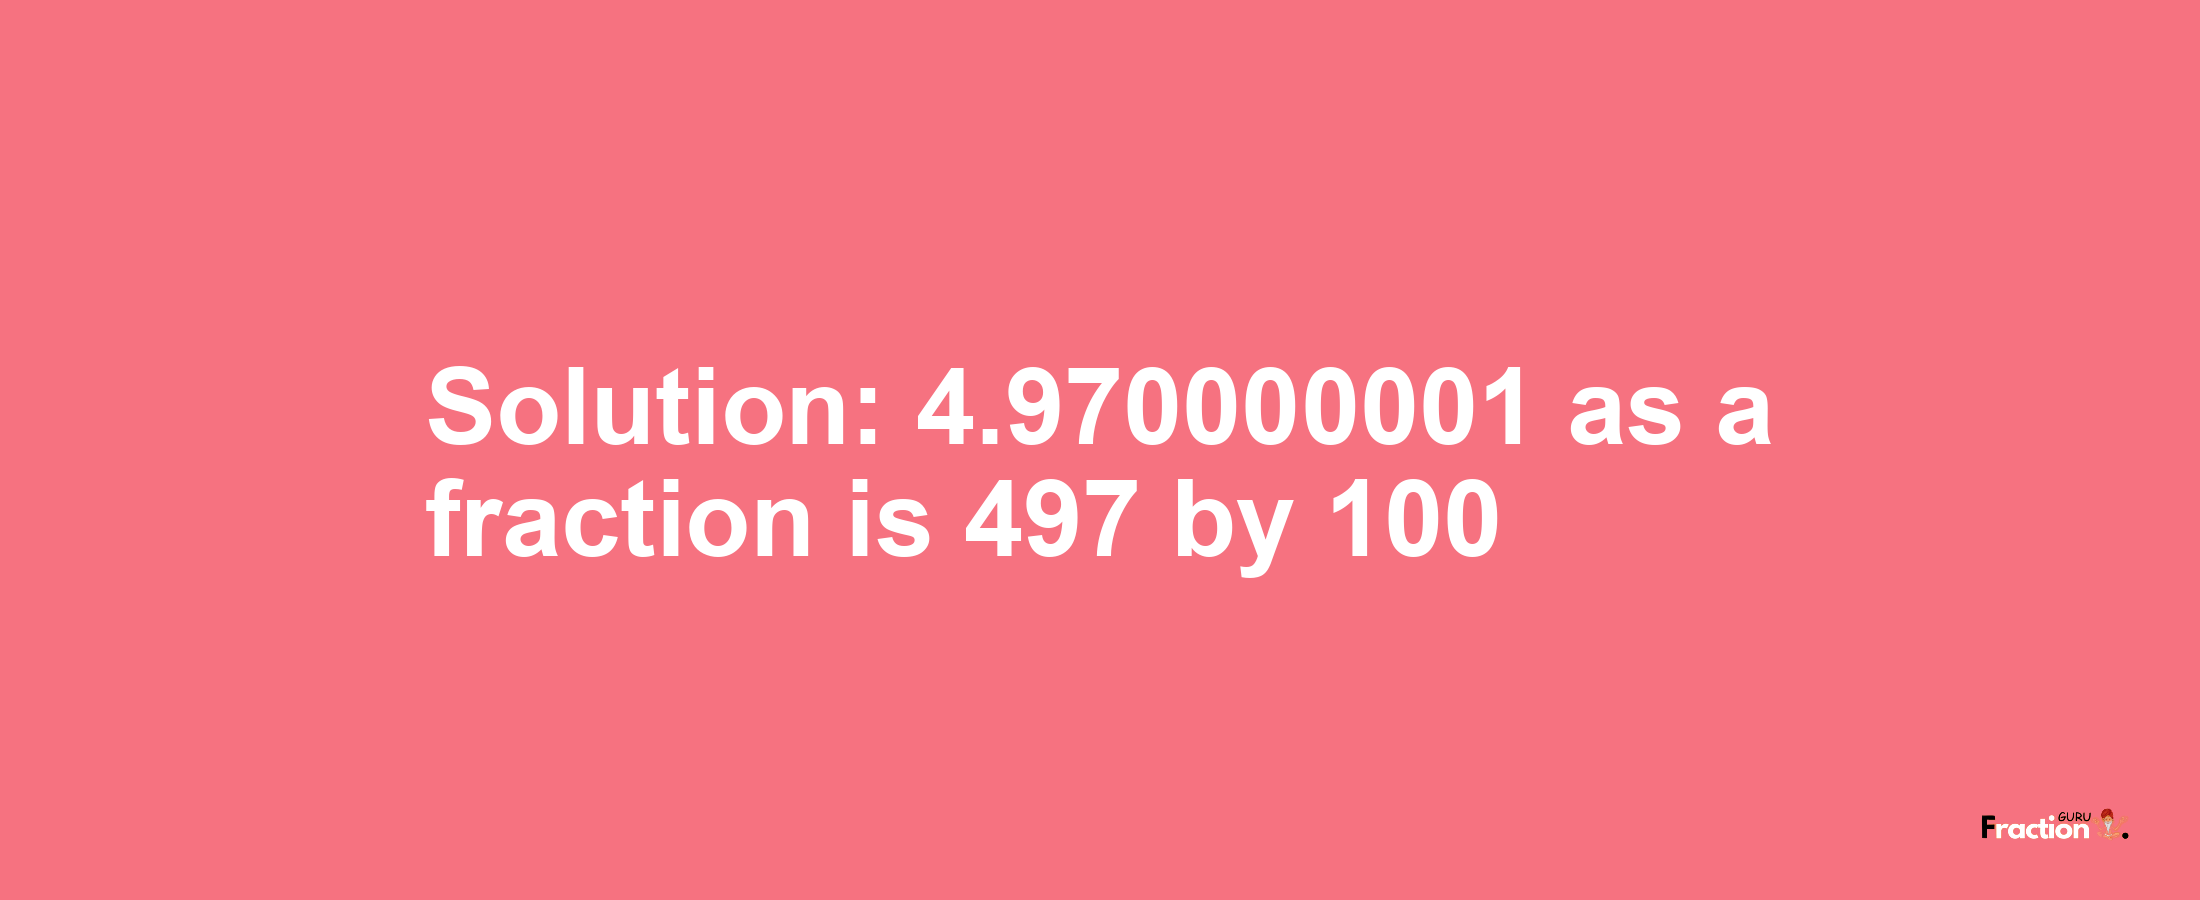 Solution:4.970000001 as a fraction is 497/100